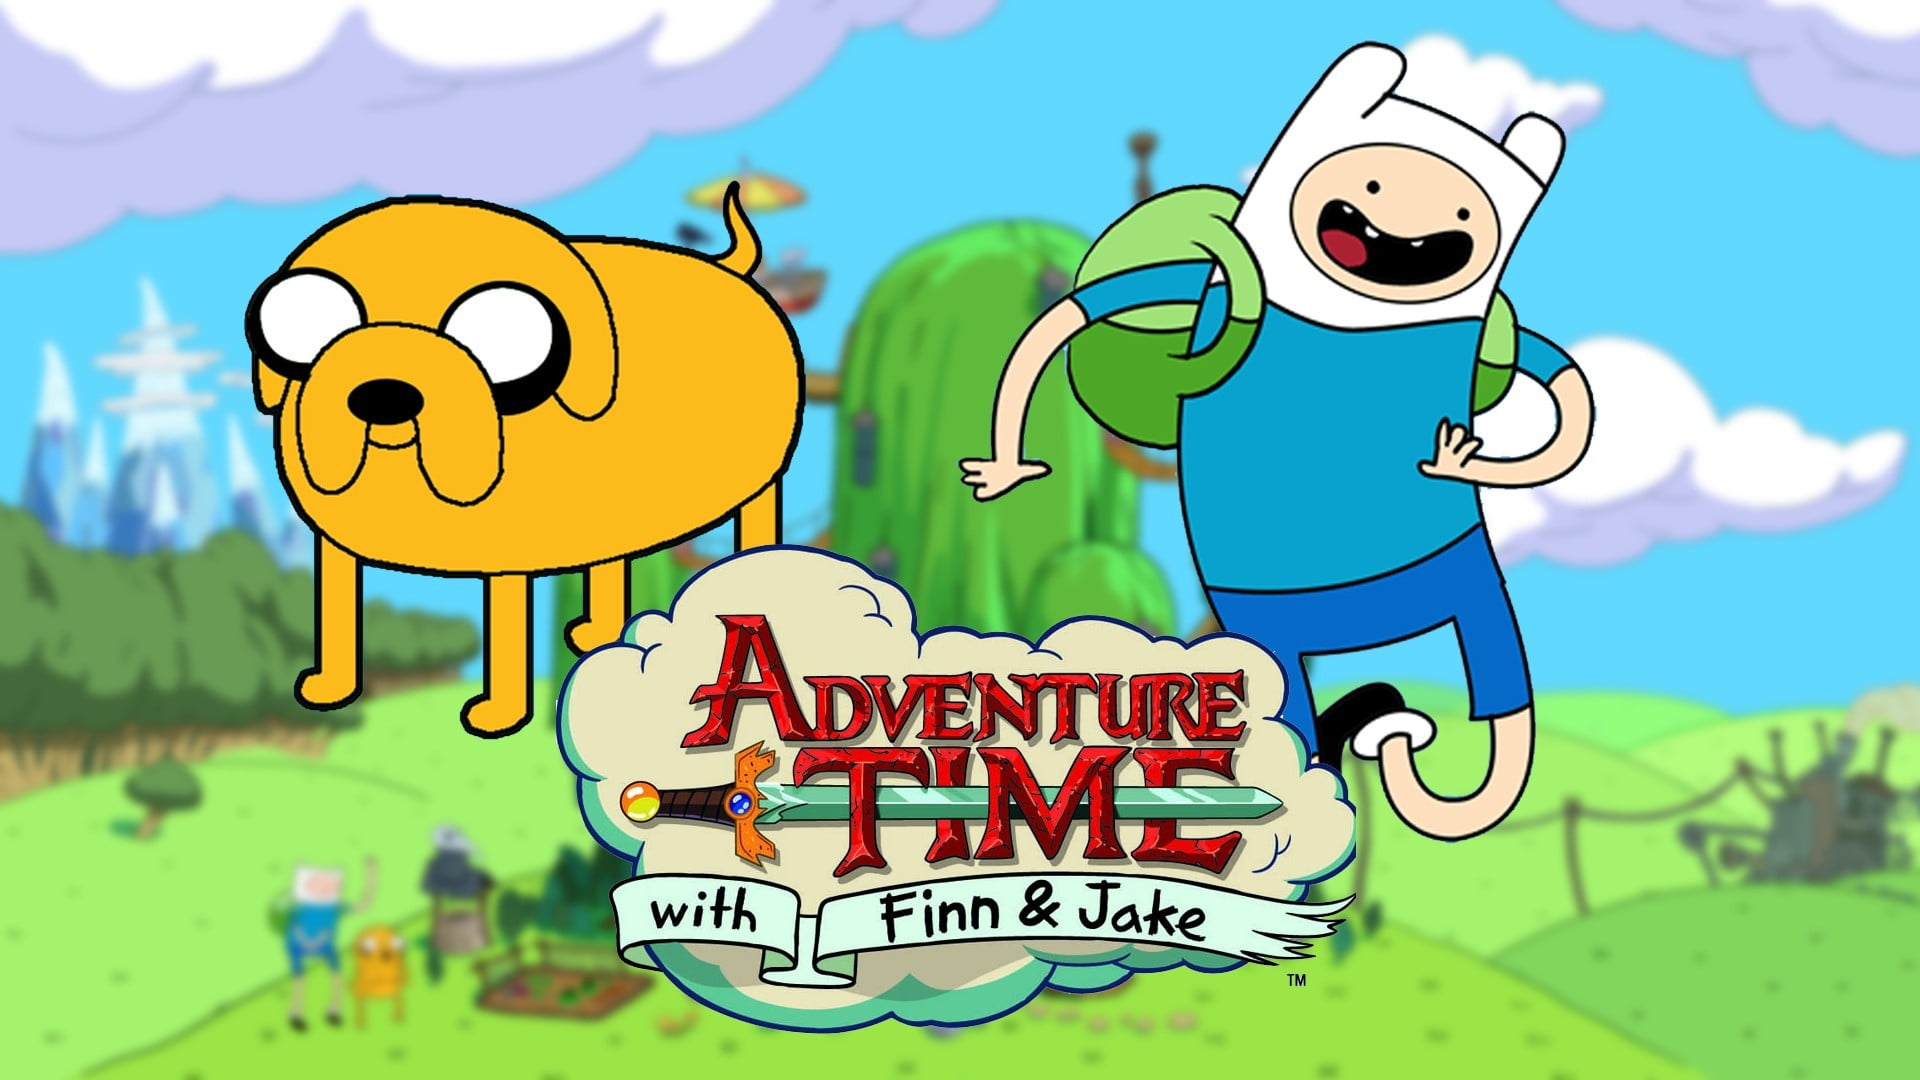 Adventure Time with Finn and Jake digital wallpaper, Adventure Time, Finn the Human, Jake the Dog